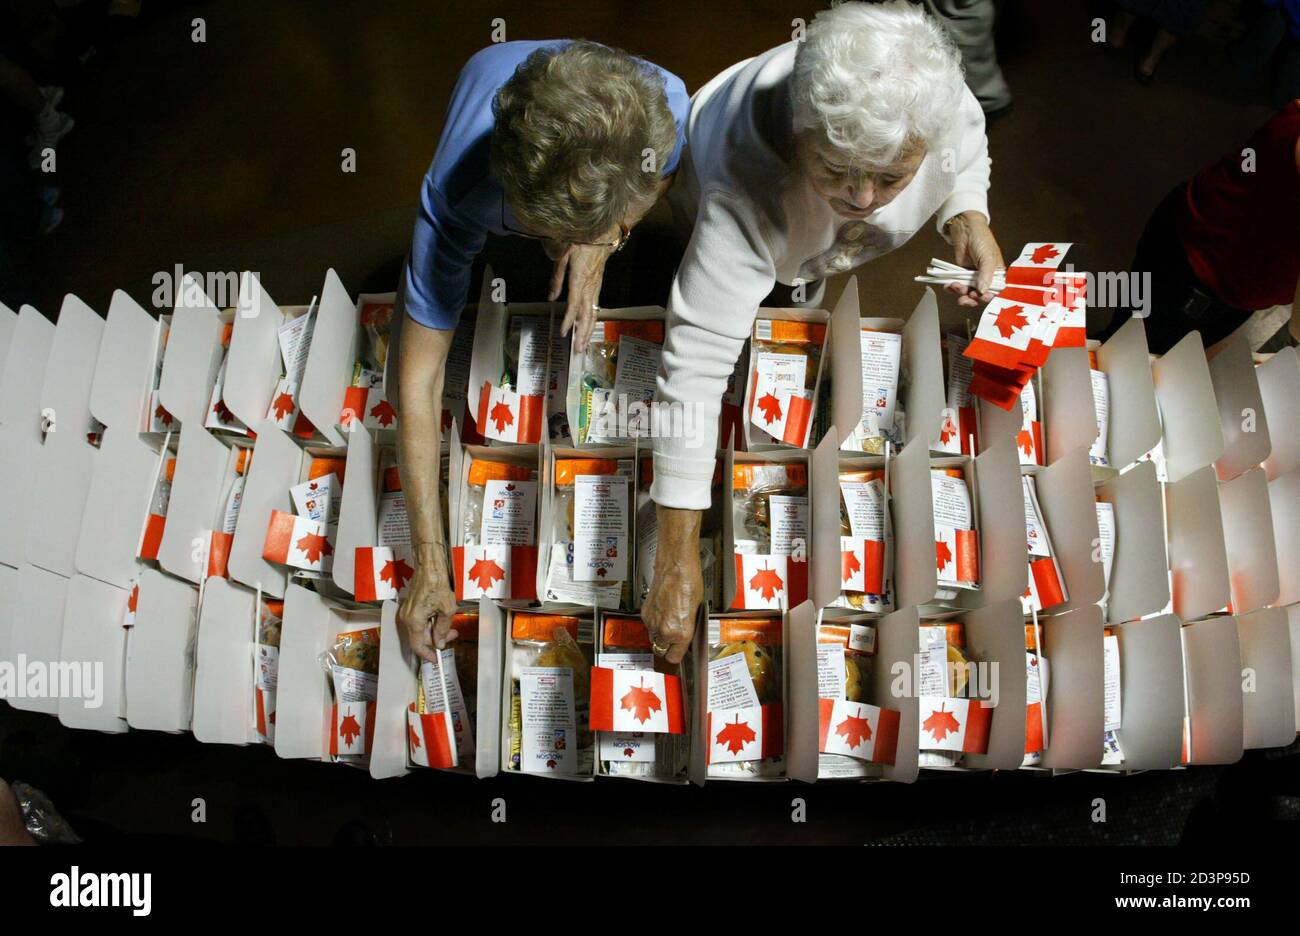 Volunteers place Canadian flags in lunch boxes, in Vancouver June 30, 2003, while preparing for the upcoming 2010 Olympic Bid annoucement. The boxes will be handed out to 18,000 people who will gather in GM Place to watch the announcement from Prague on July 2. Vancouver is competing with Salzburg, Austria and Pyeongchang, South Korea to host the 2010 Winter Olympics. REUTERS/Andy Clark  AC/GAC Stock Photo